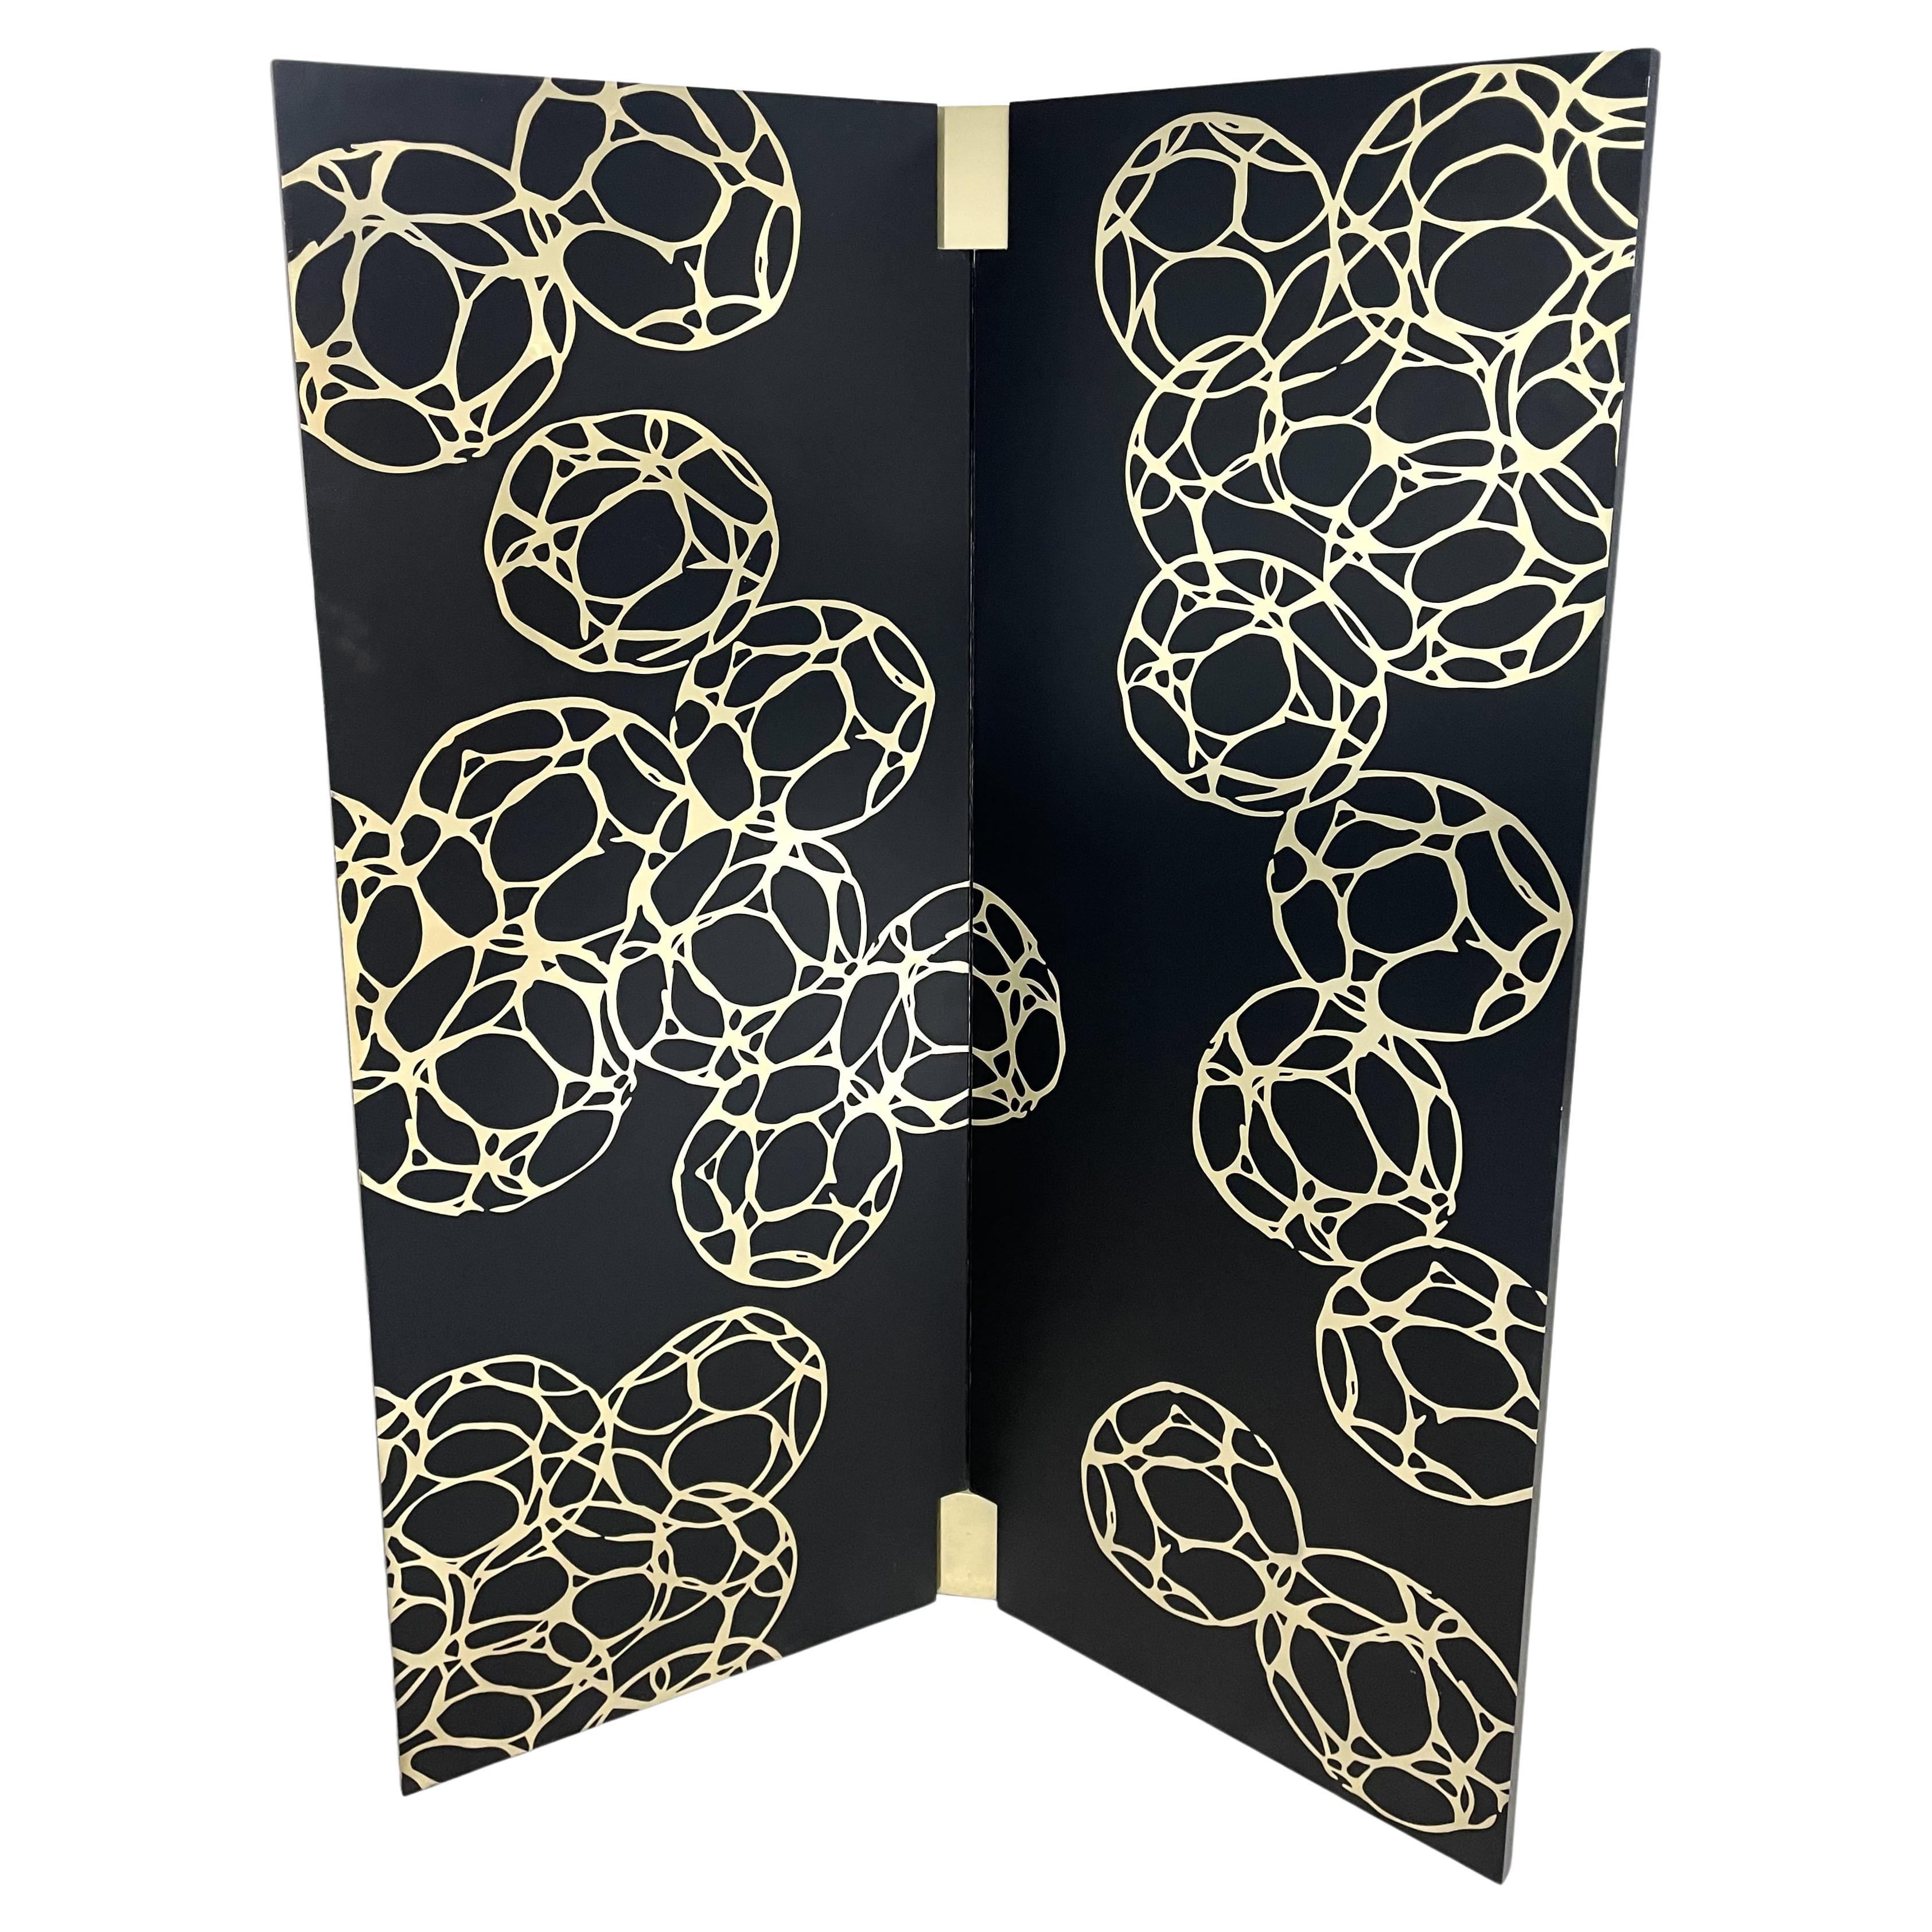 Two-Panel Lacquer and Titanium Screen by Frédérique Domergue, Limited Edition